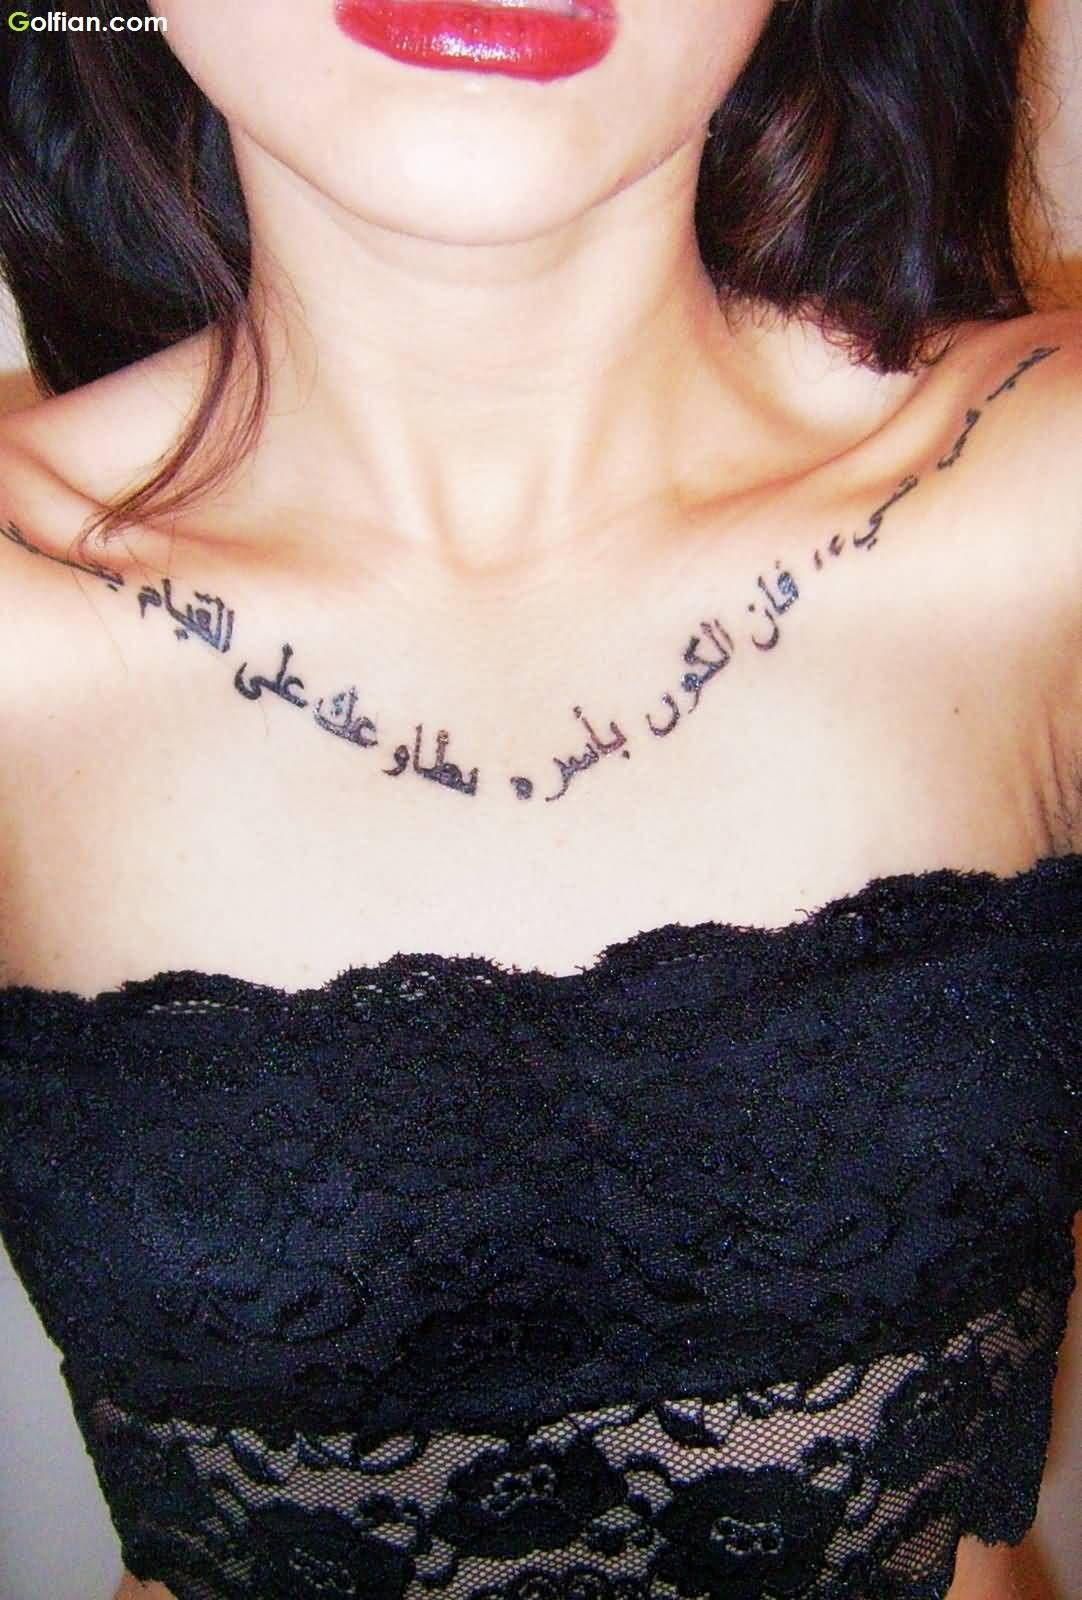 Girly chest tattoos